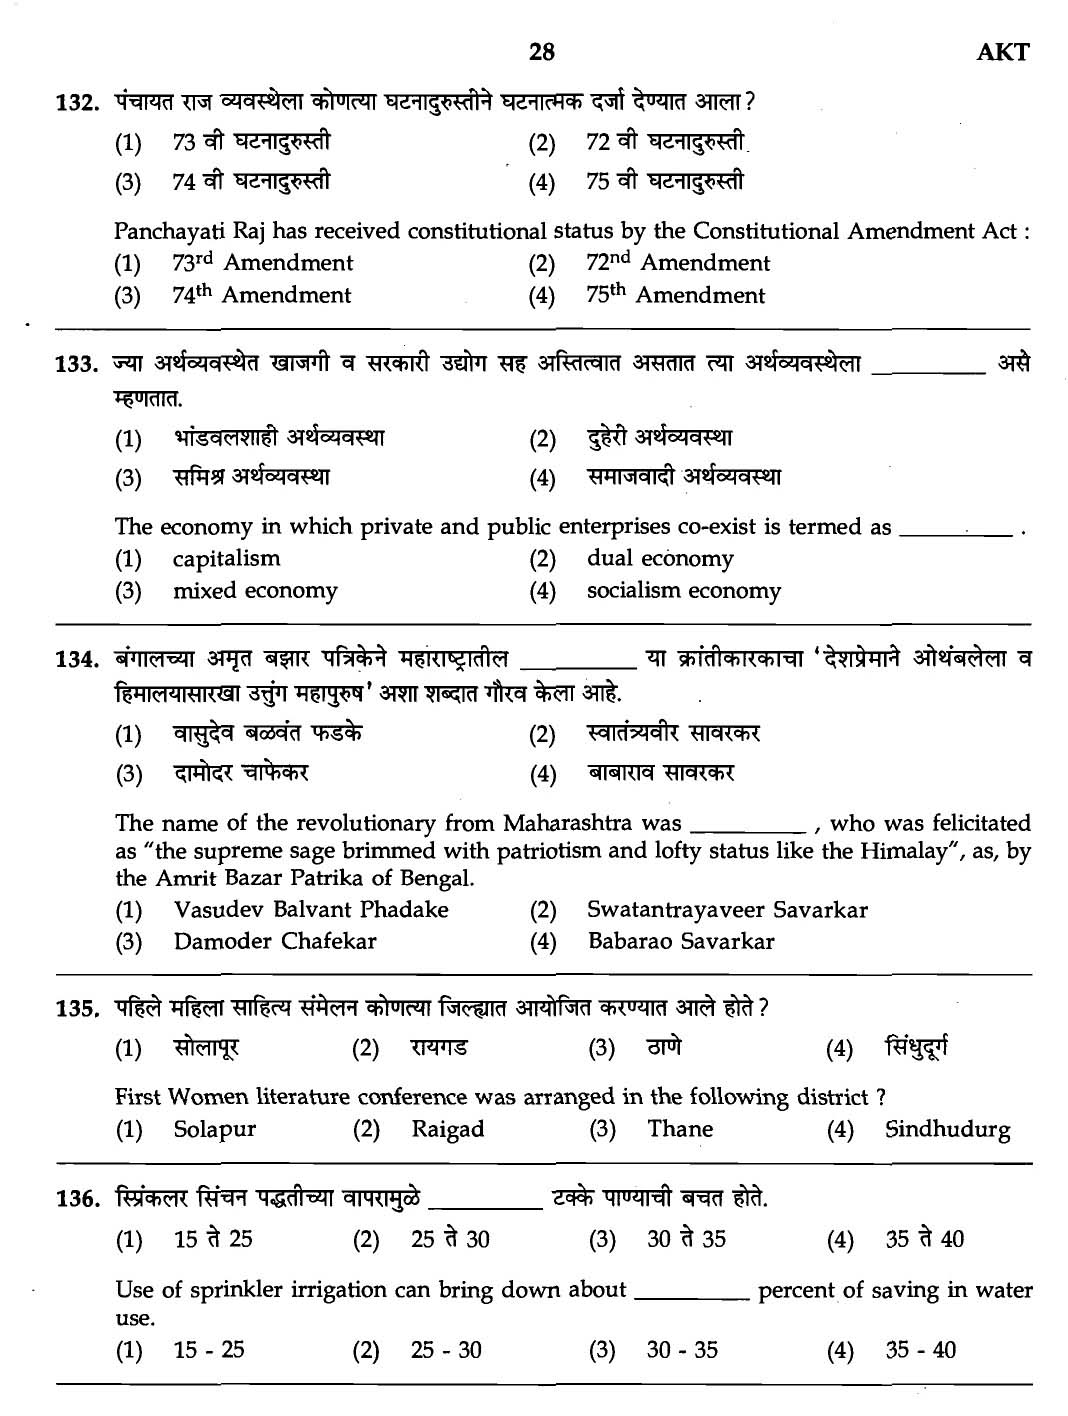 MPSC Agricultural Services Exam 2007 General Question Paper 26